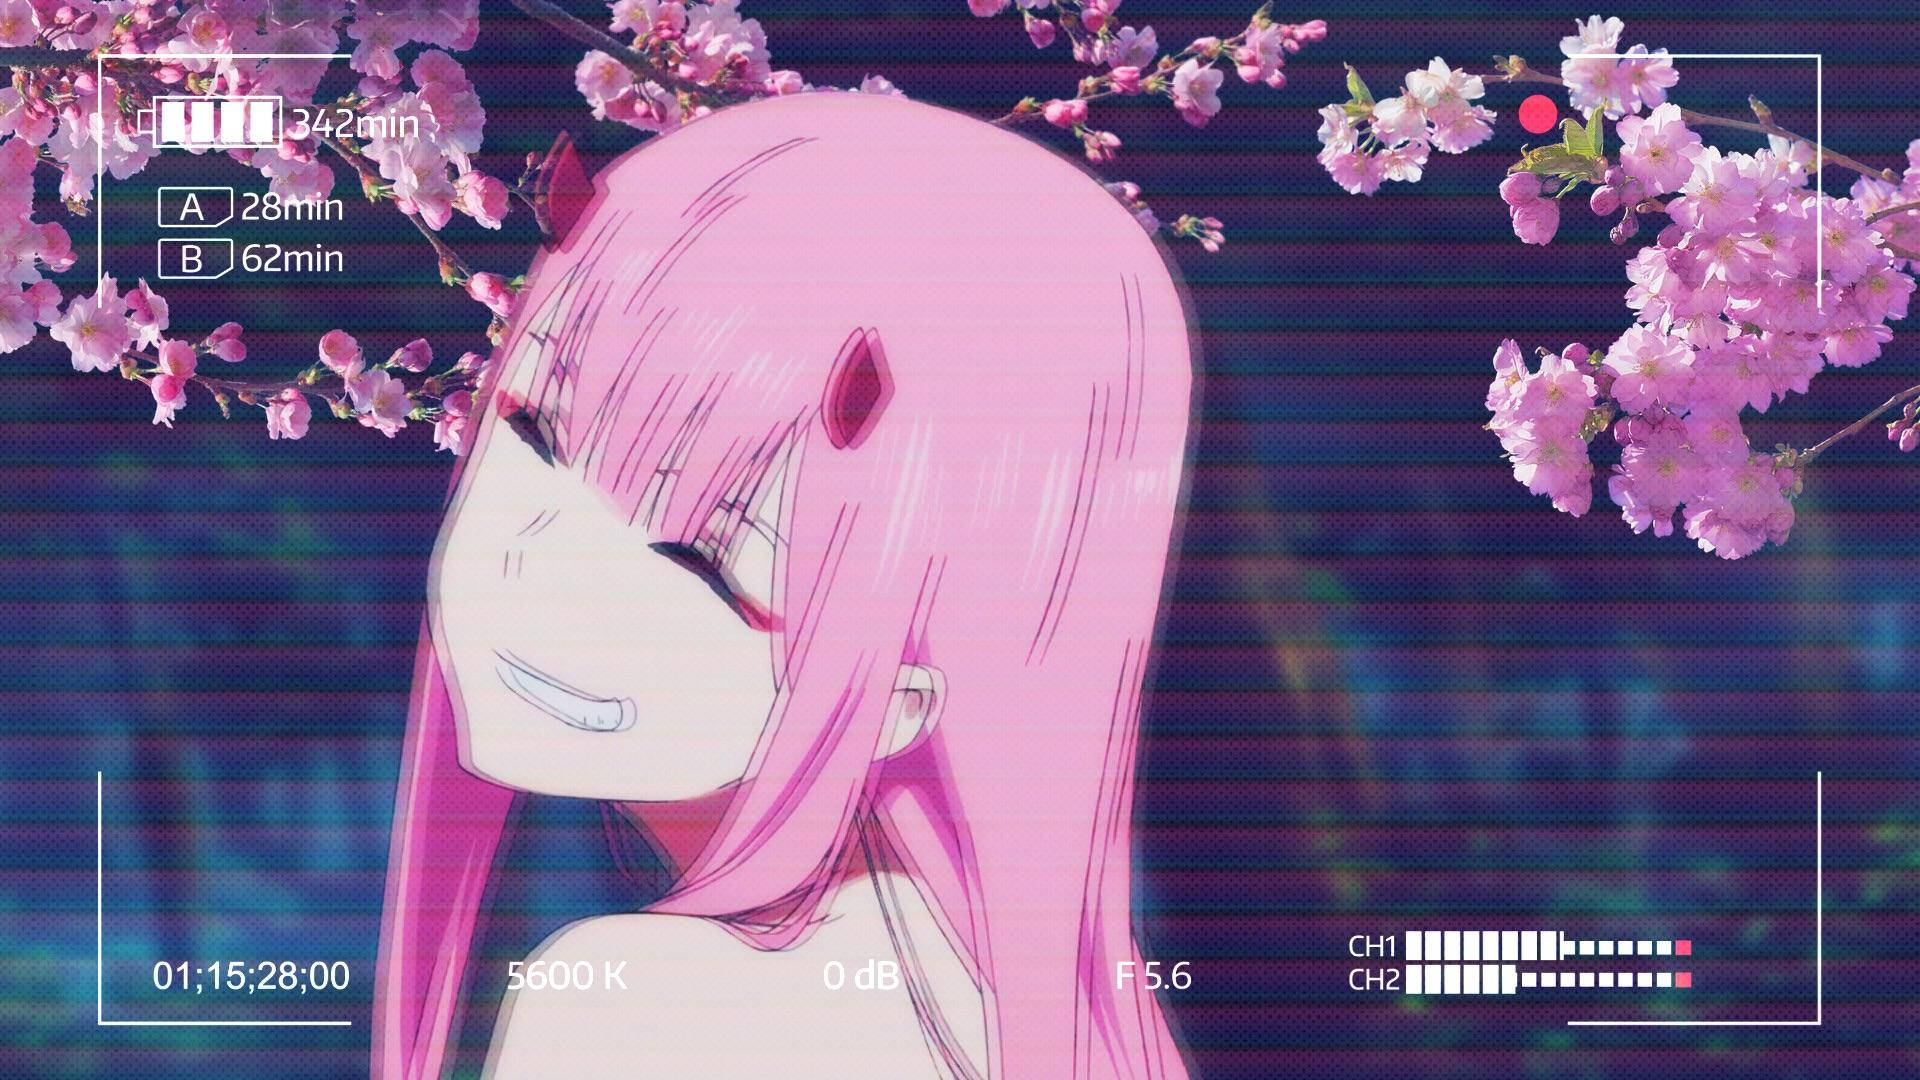 "Catch the sparks of the stars with me, Zero Two!" Wallpaper